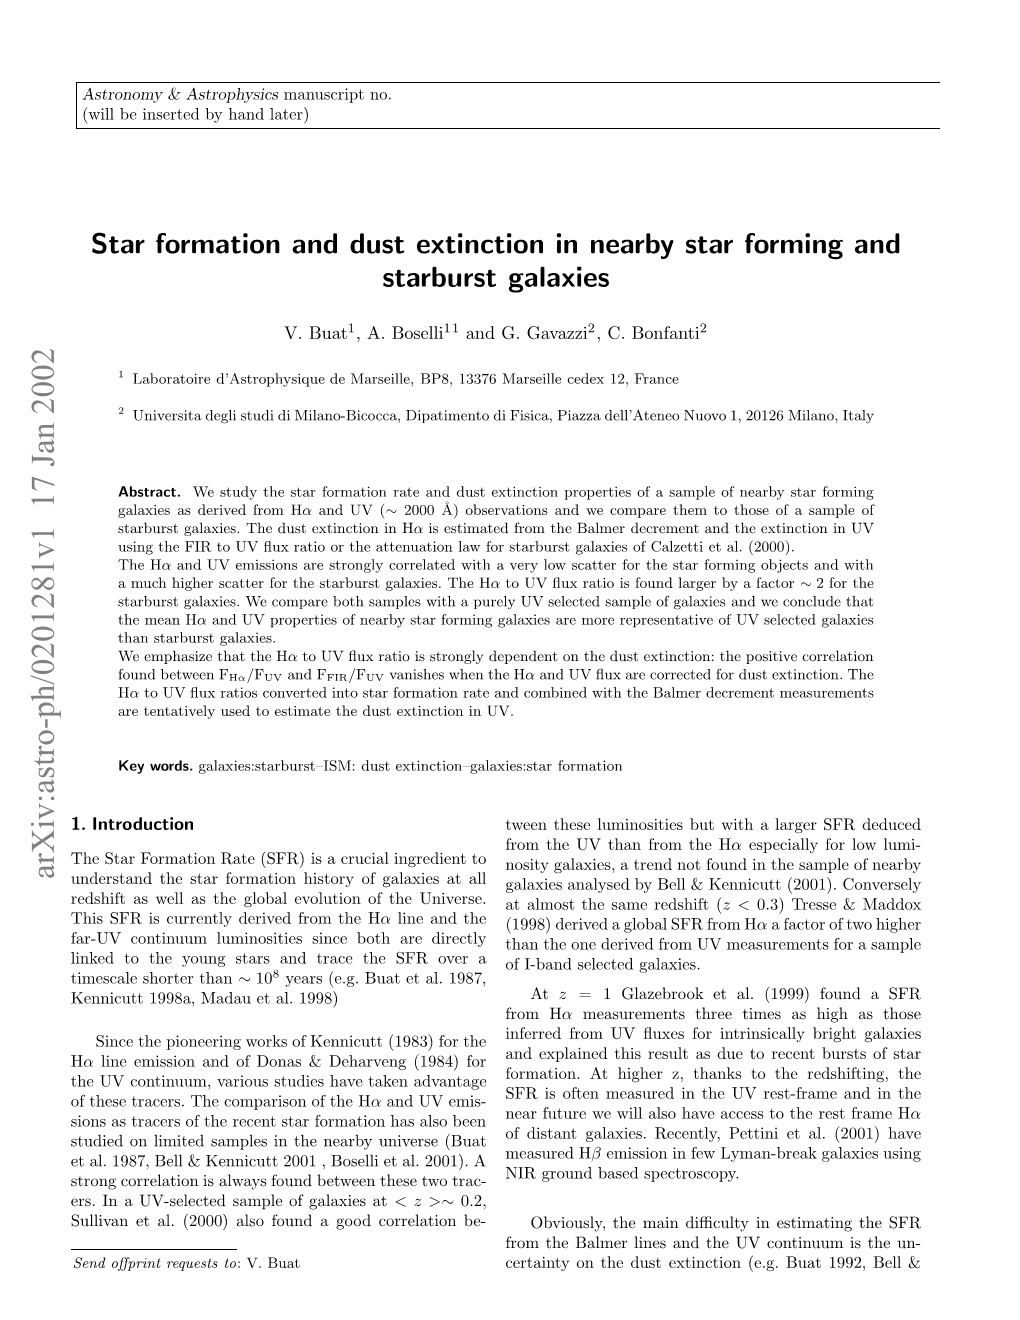 Star Formation and Dust Extinction in Nearby Star Forming and Starburst